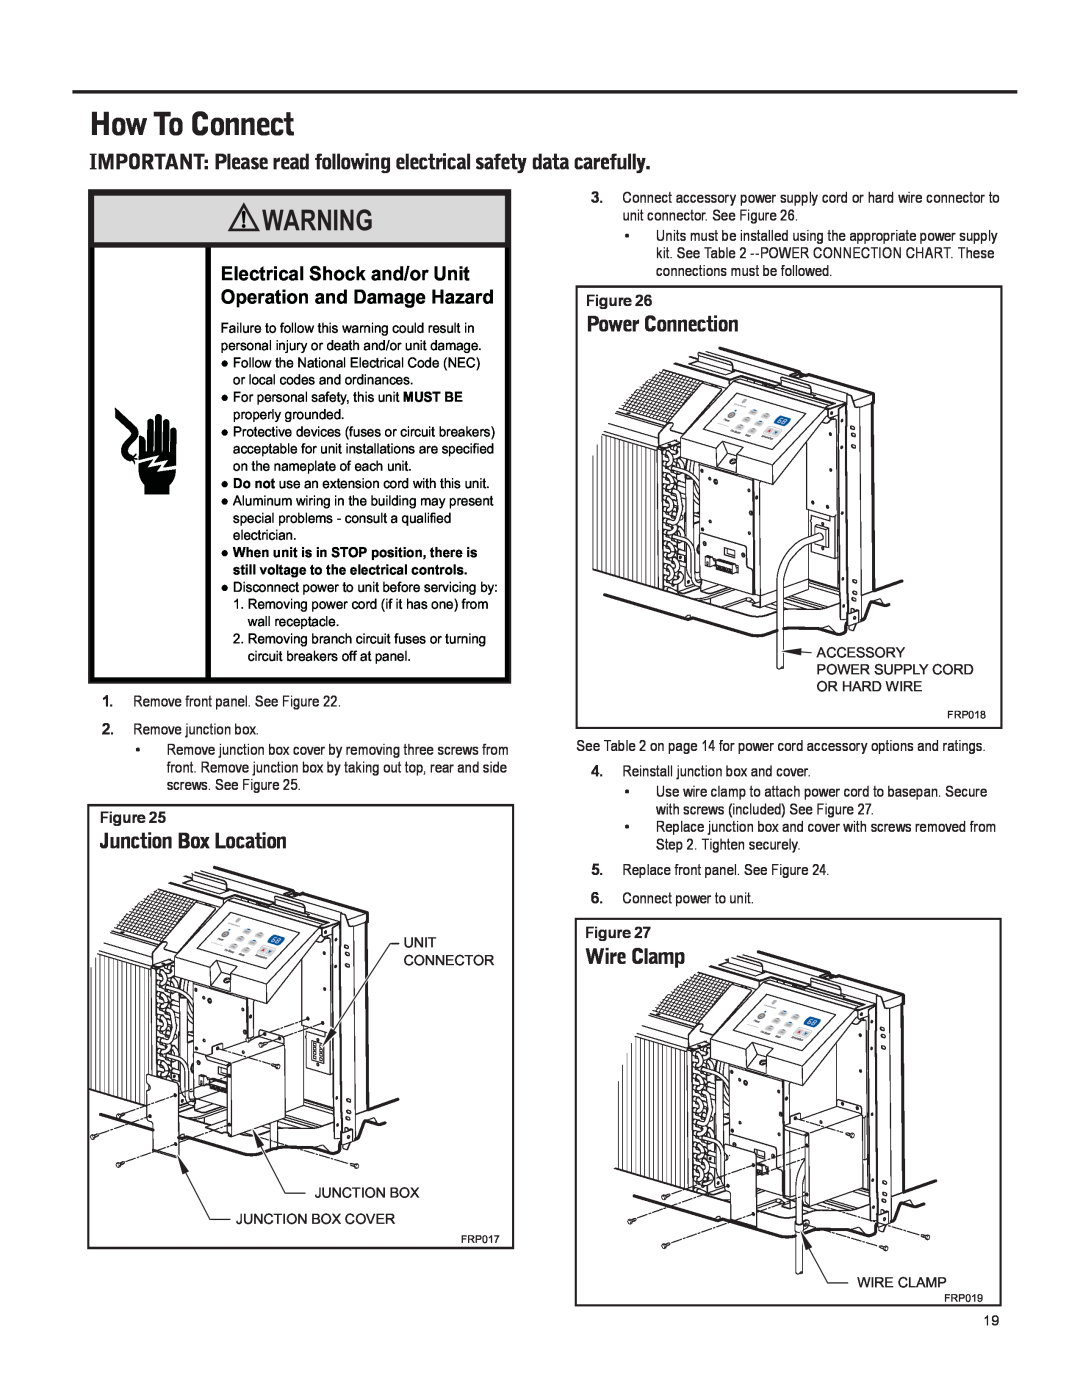 Friedrich 920-087-09 (12/10) How To Connect, Power Connection, Electrical Shock and/or Unit, Operation and Damage Hazard 